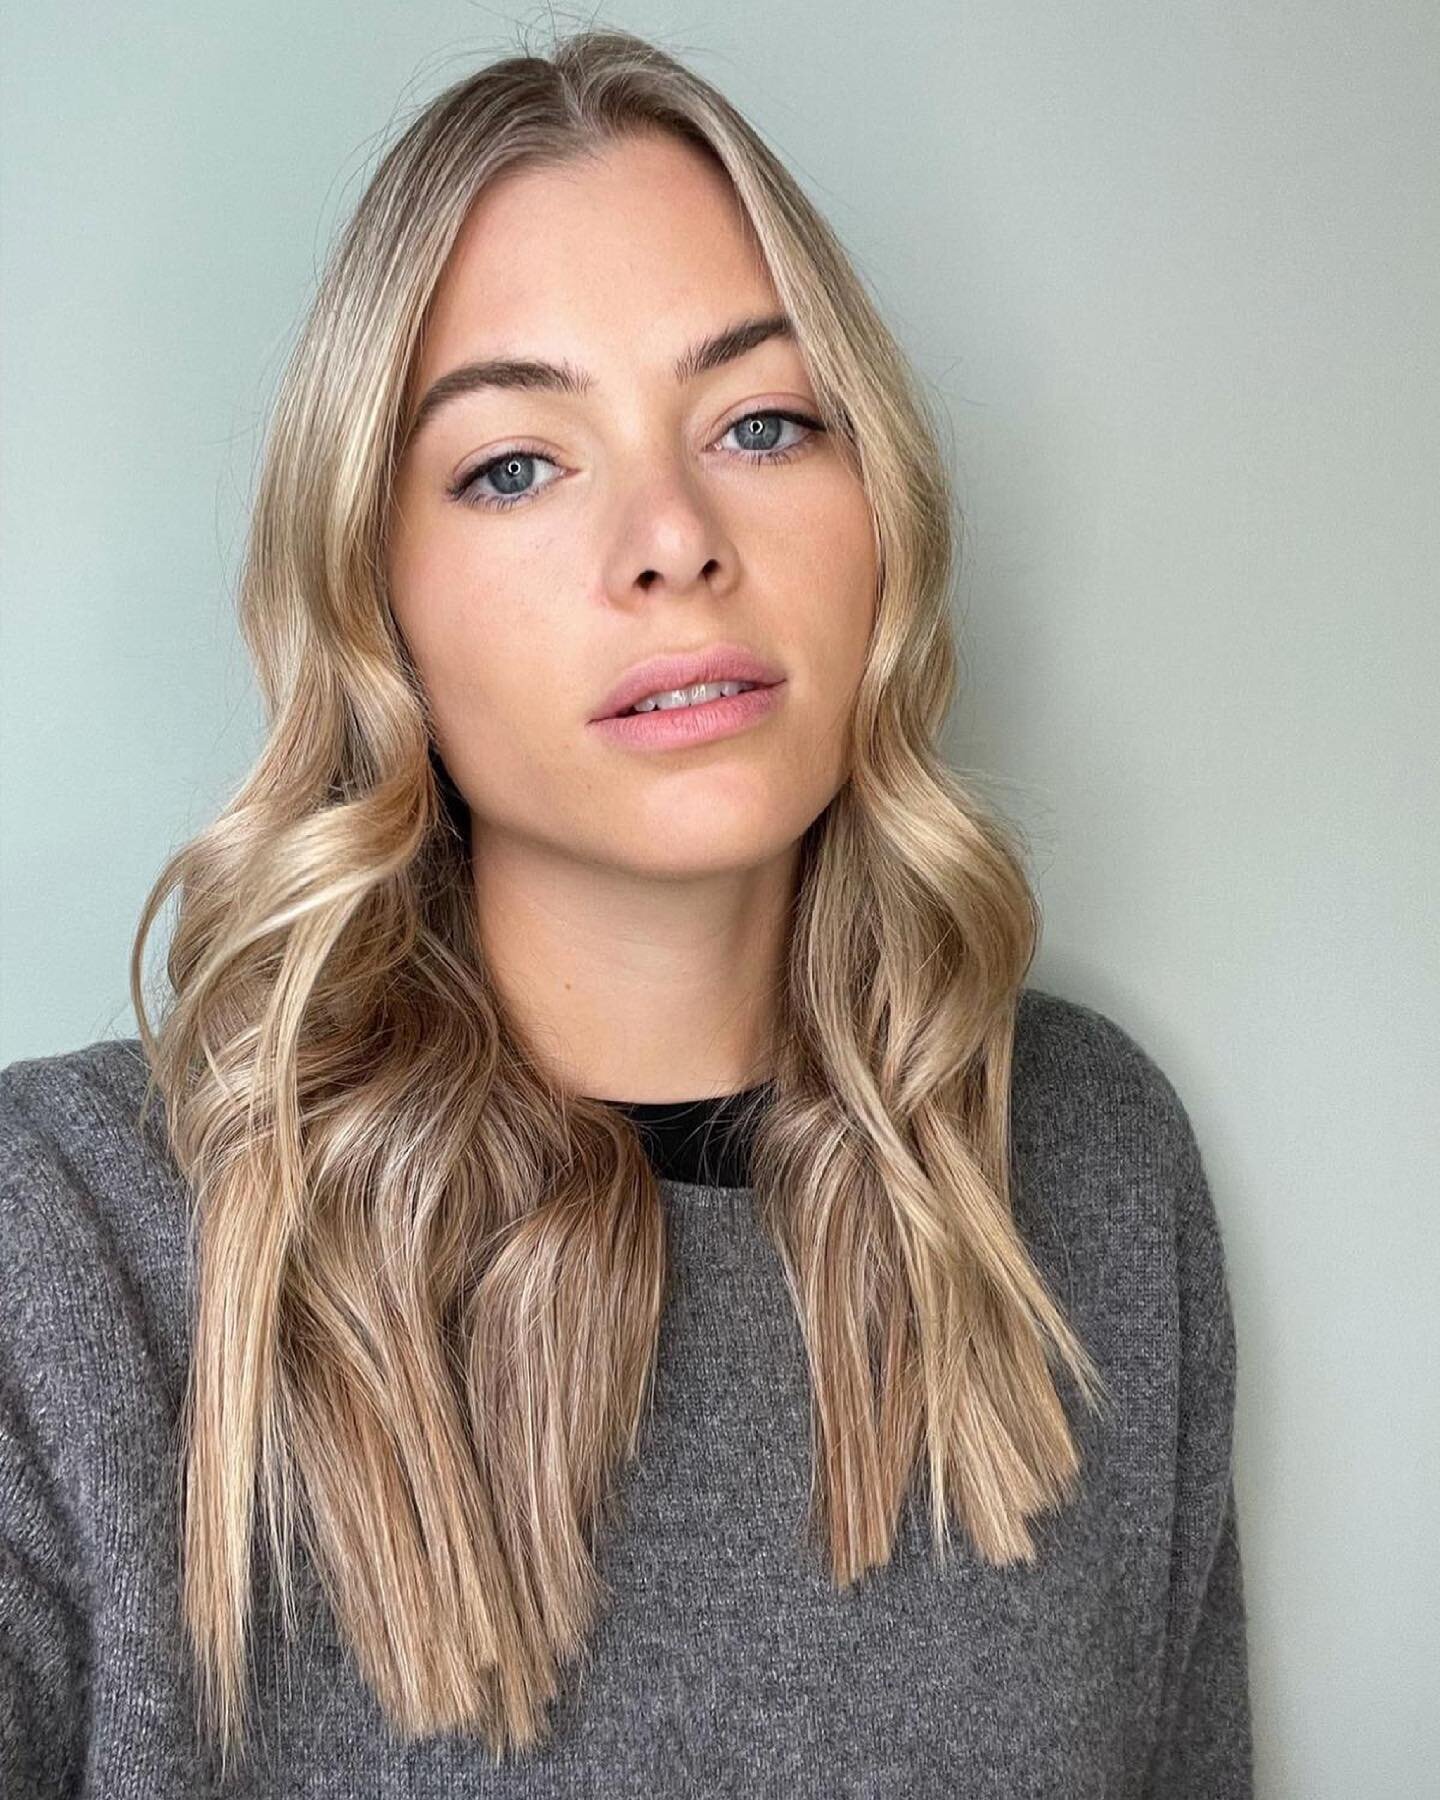 💫Colour goals on beautiful @missbobene 

Back to back babylights + tone, waved with @ghdhair 

&bull;
&bull;
&bull;
&bull;

#hairgoals #hairstyles #haircare #luxuryhaircare #blondehair #blondehighlights #summerhair #summerhairstyles #haircolorist #h